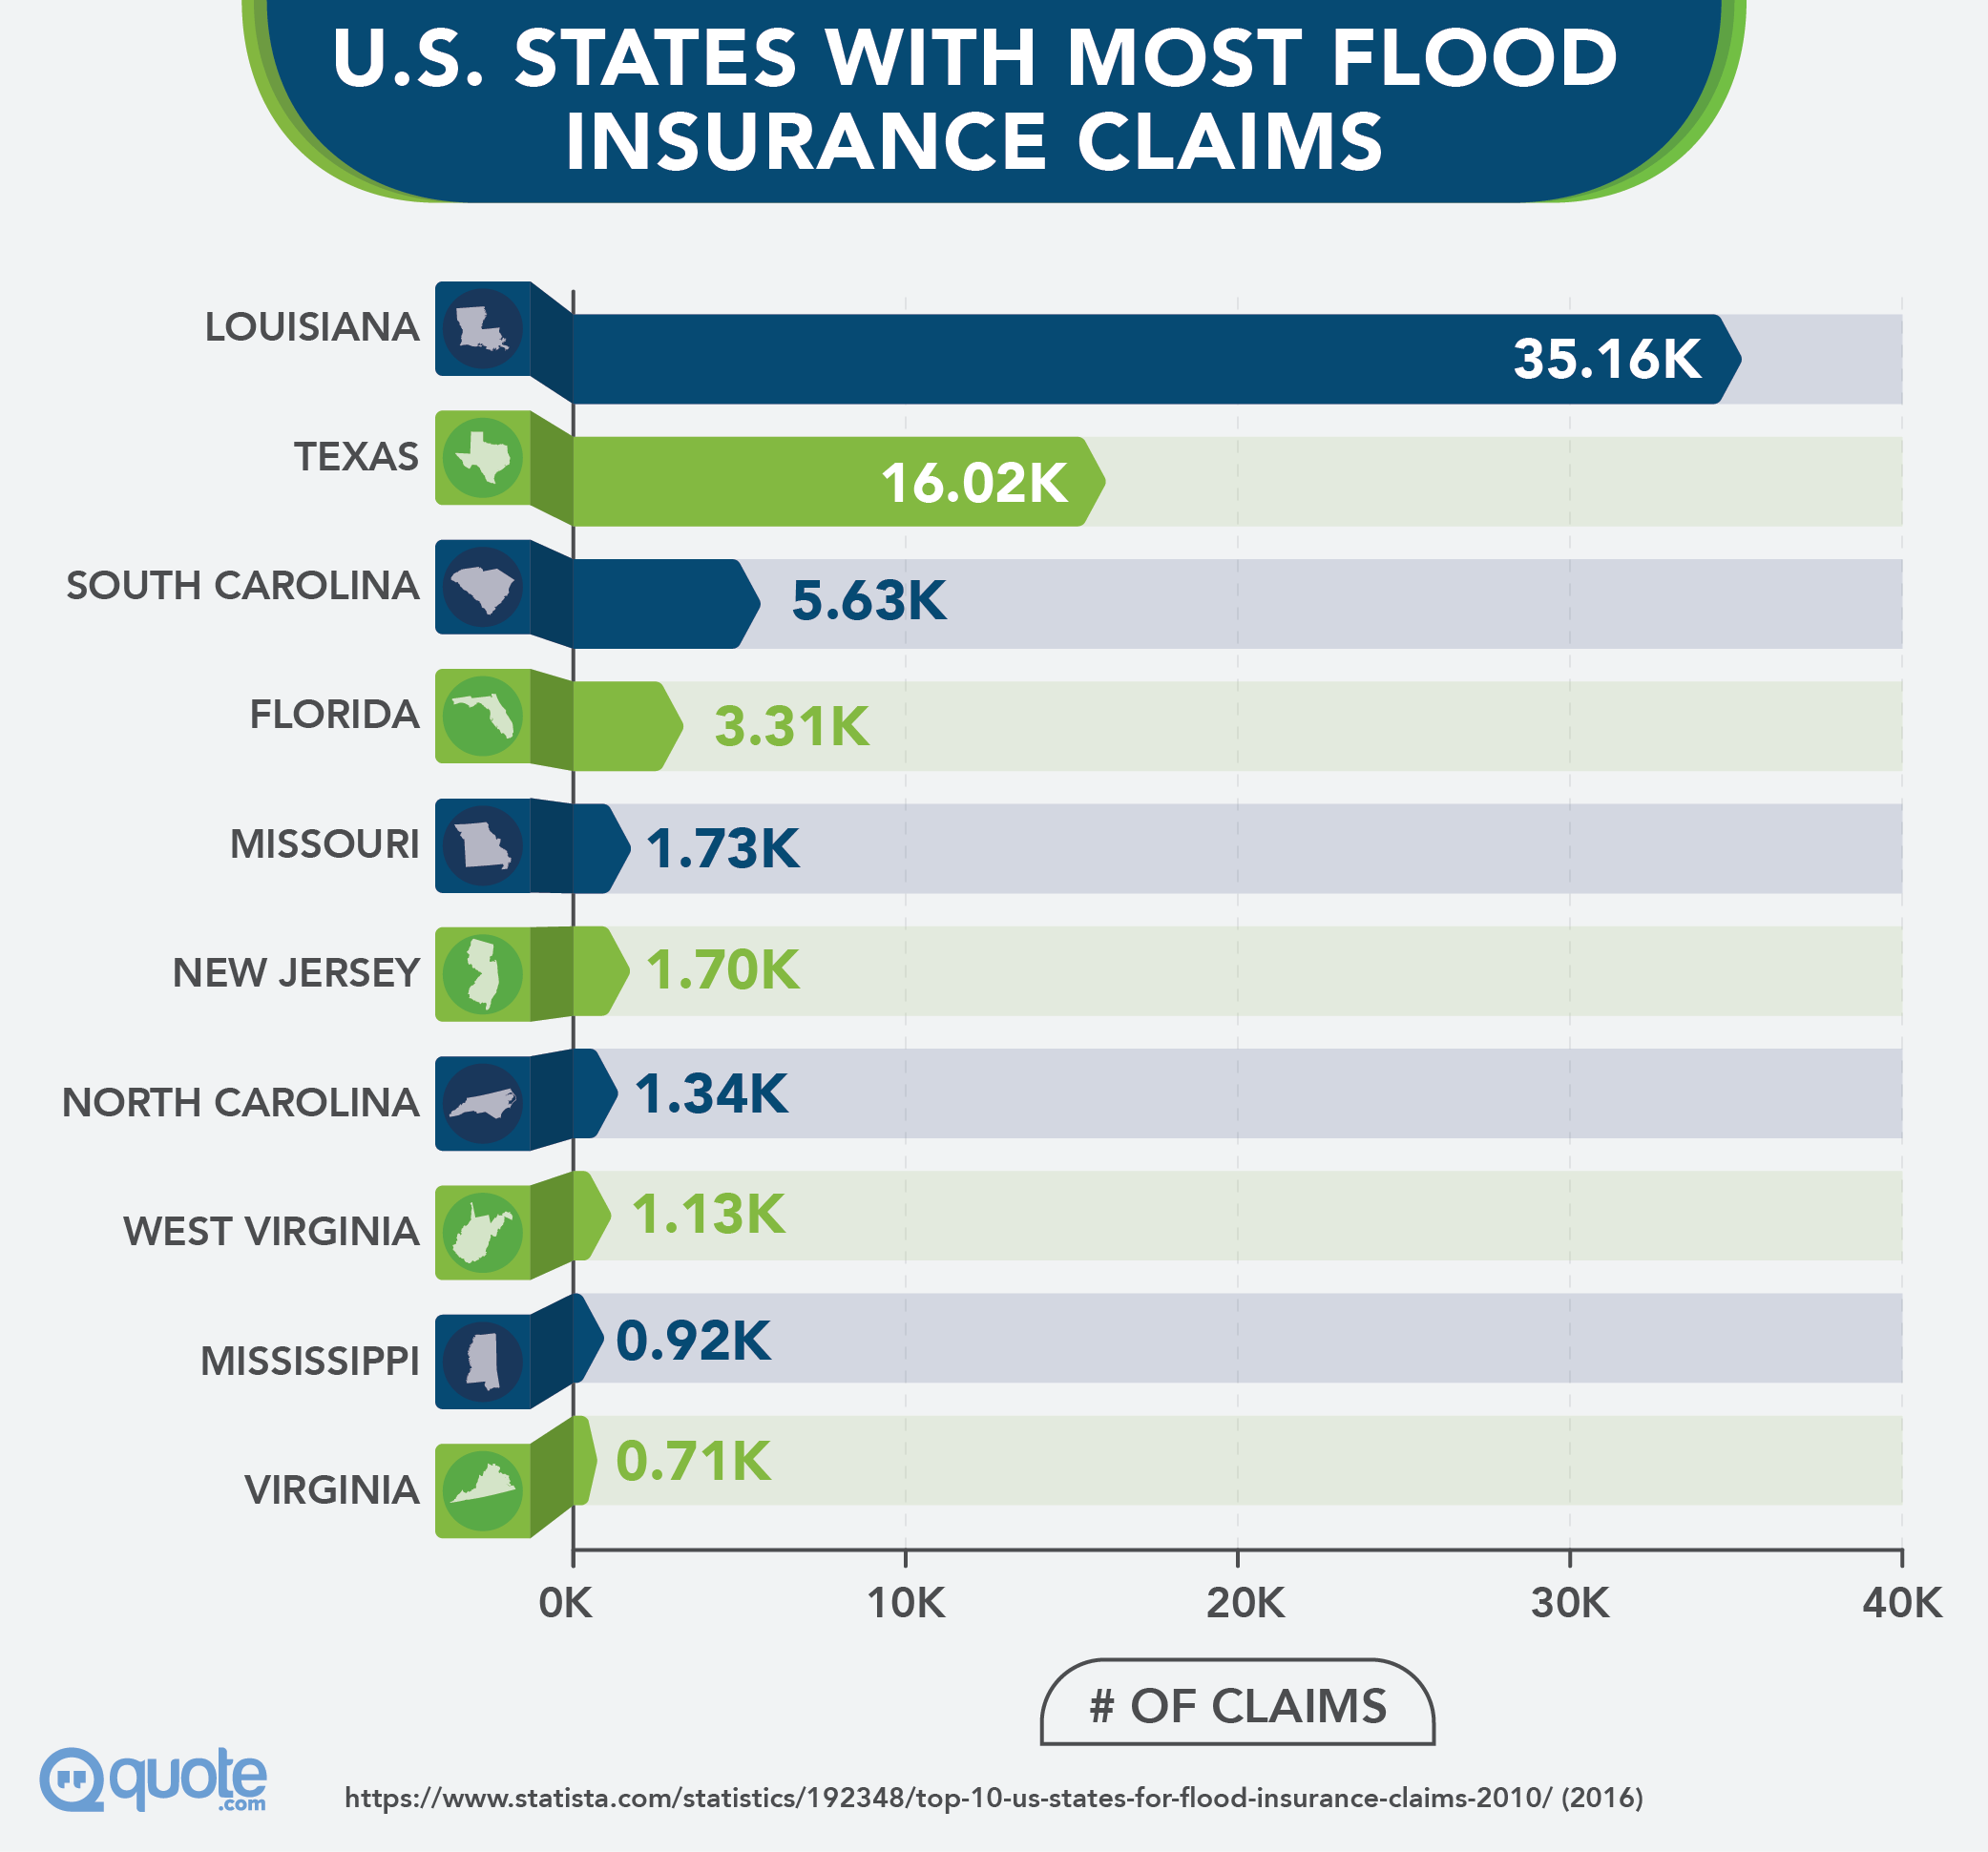 U.S. States With Most Flood Insurance Claims